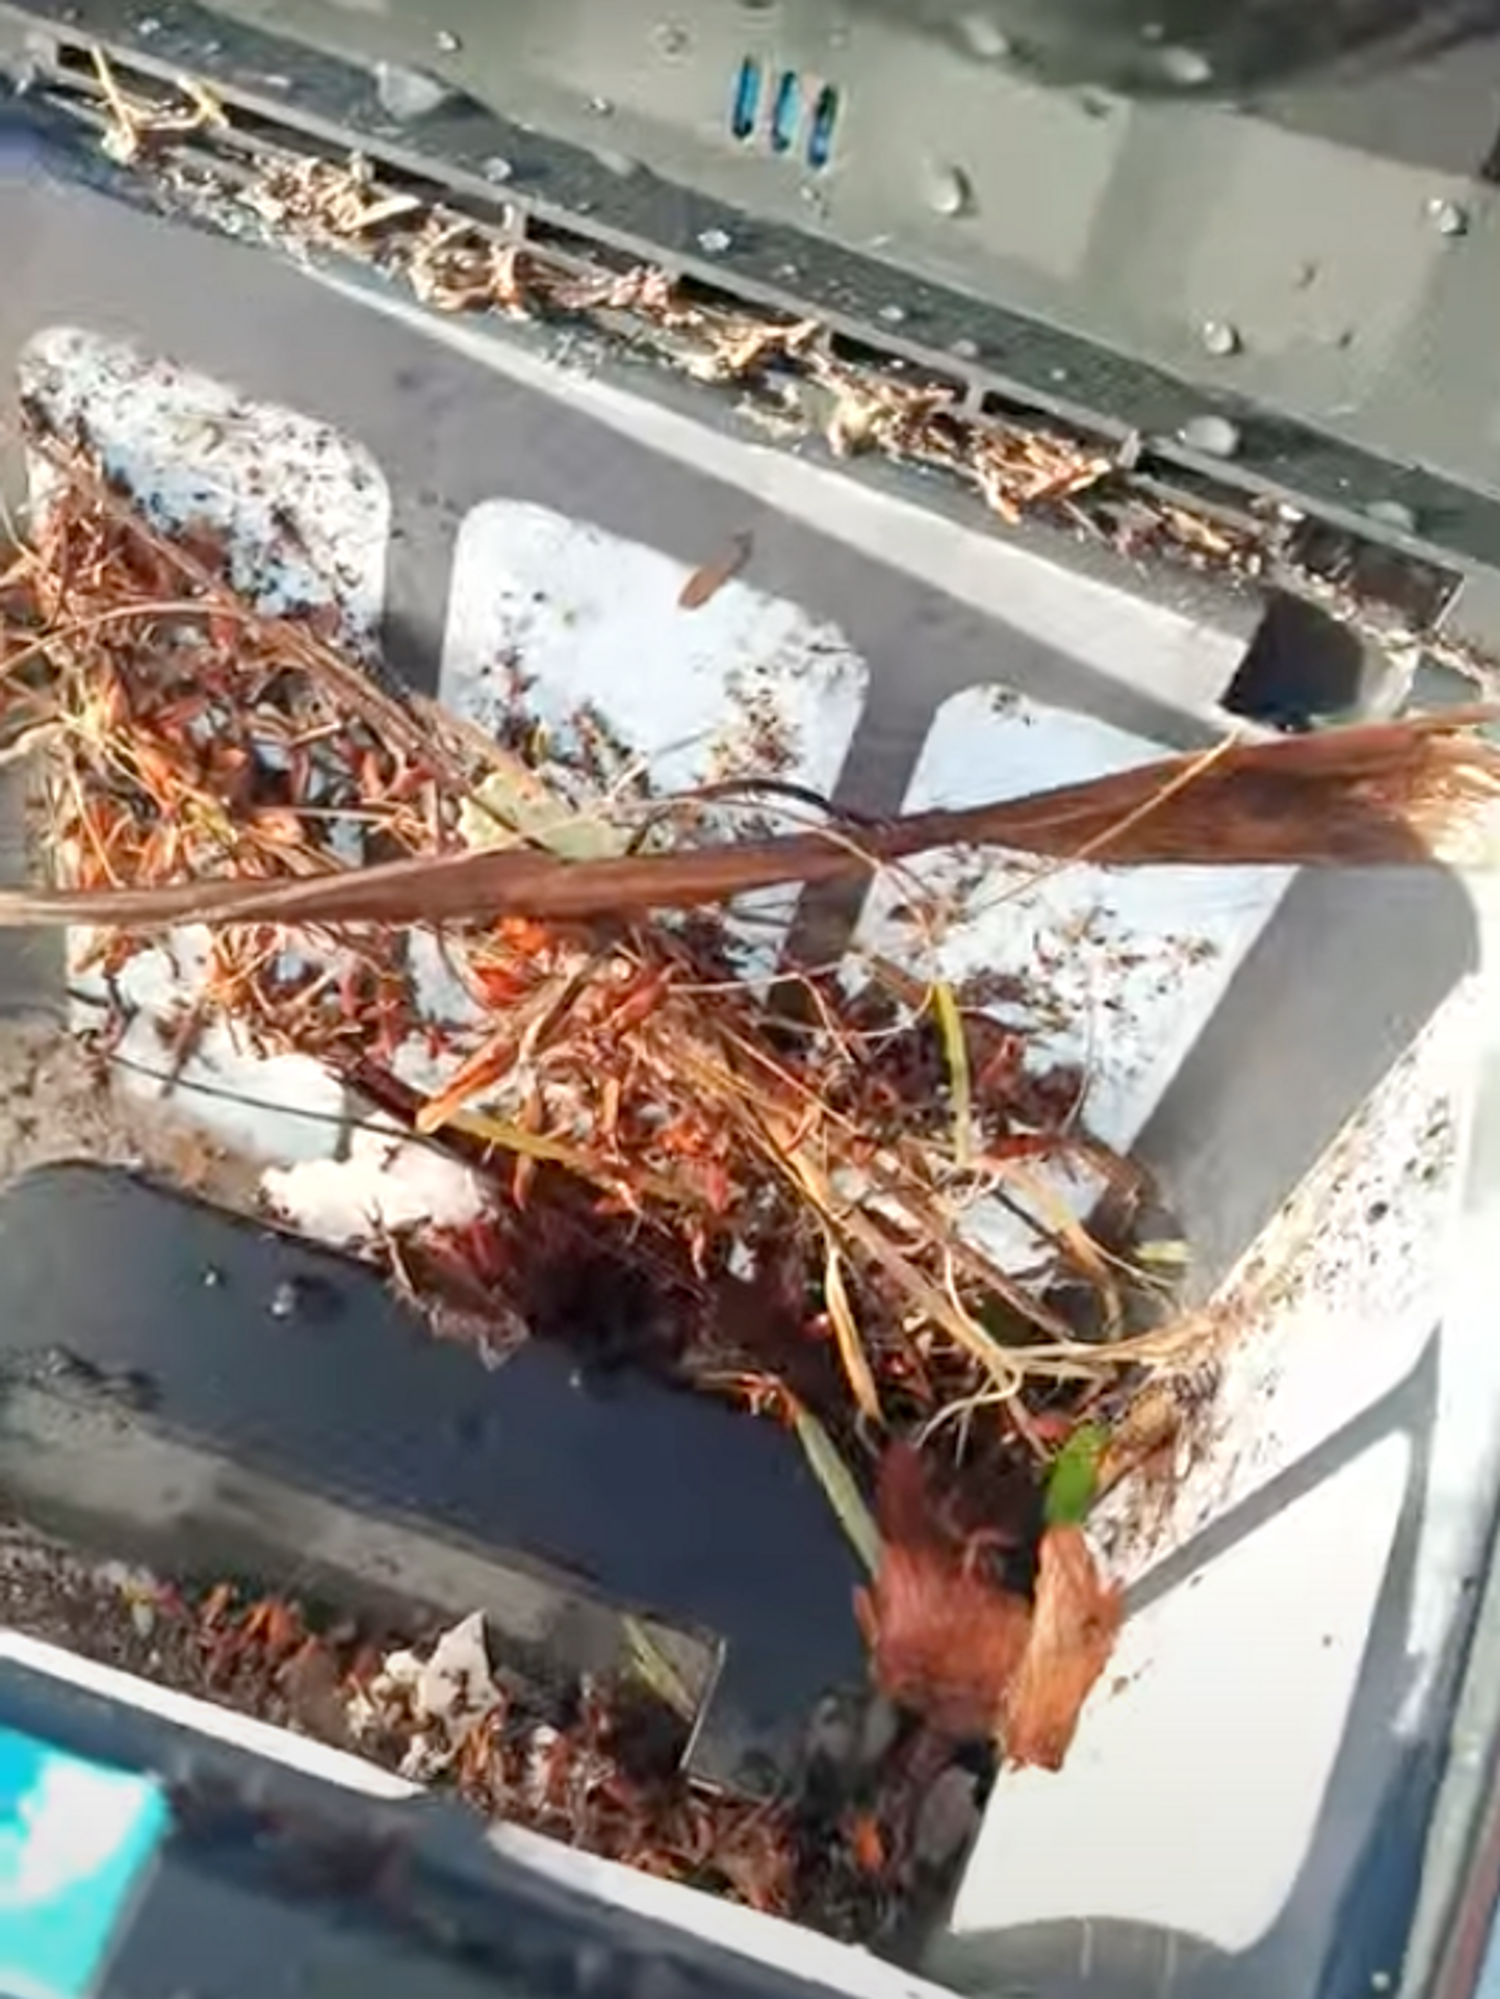 a photo of the inside of the waste basket for Aiper Scuba S1 Cordless Robotic Pool Cleaner showing all the debris it picked up while cleaning.